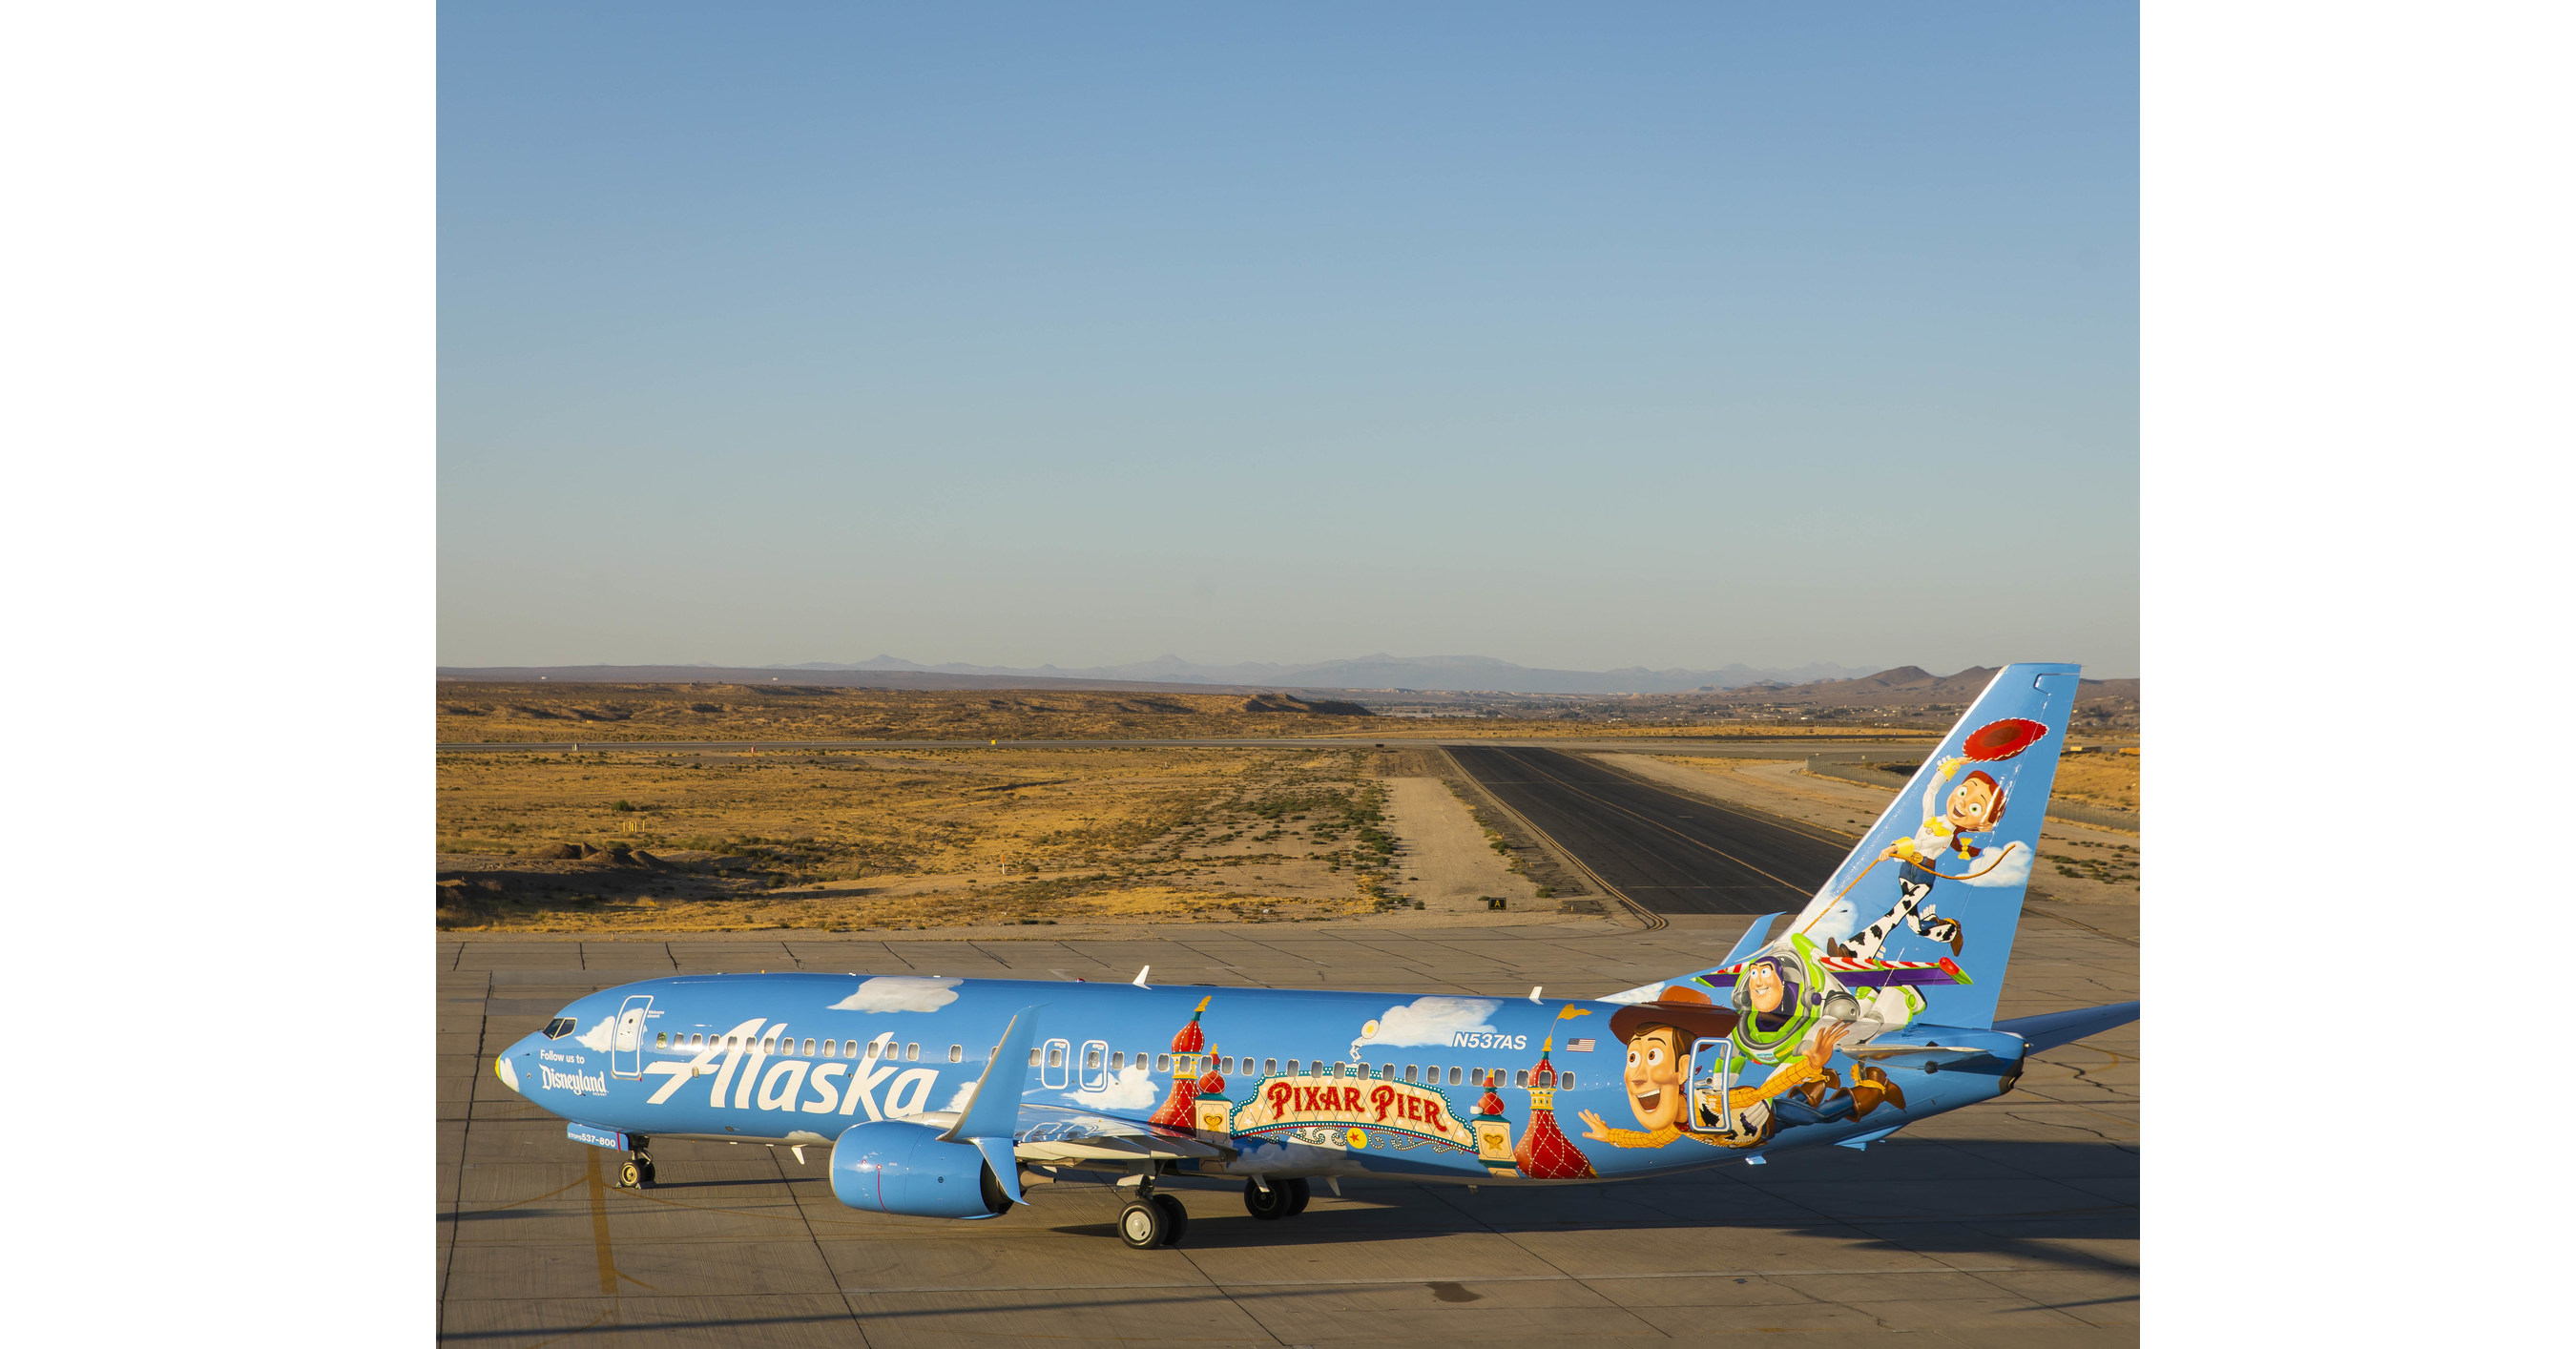 Alaska Airlines Newest Painted Pixar Themed Aircraft Showcases Pixar Pier At Disney California Adventure Park Along With A Few Well Known Faces - american airlines roblox music